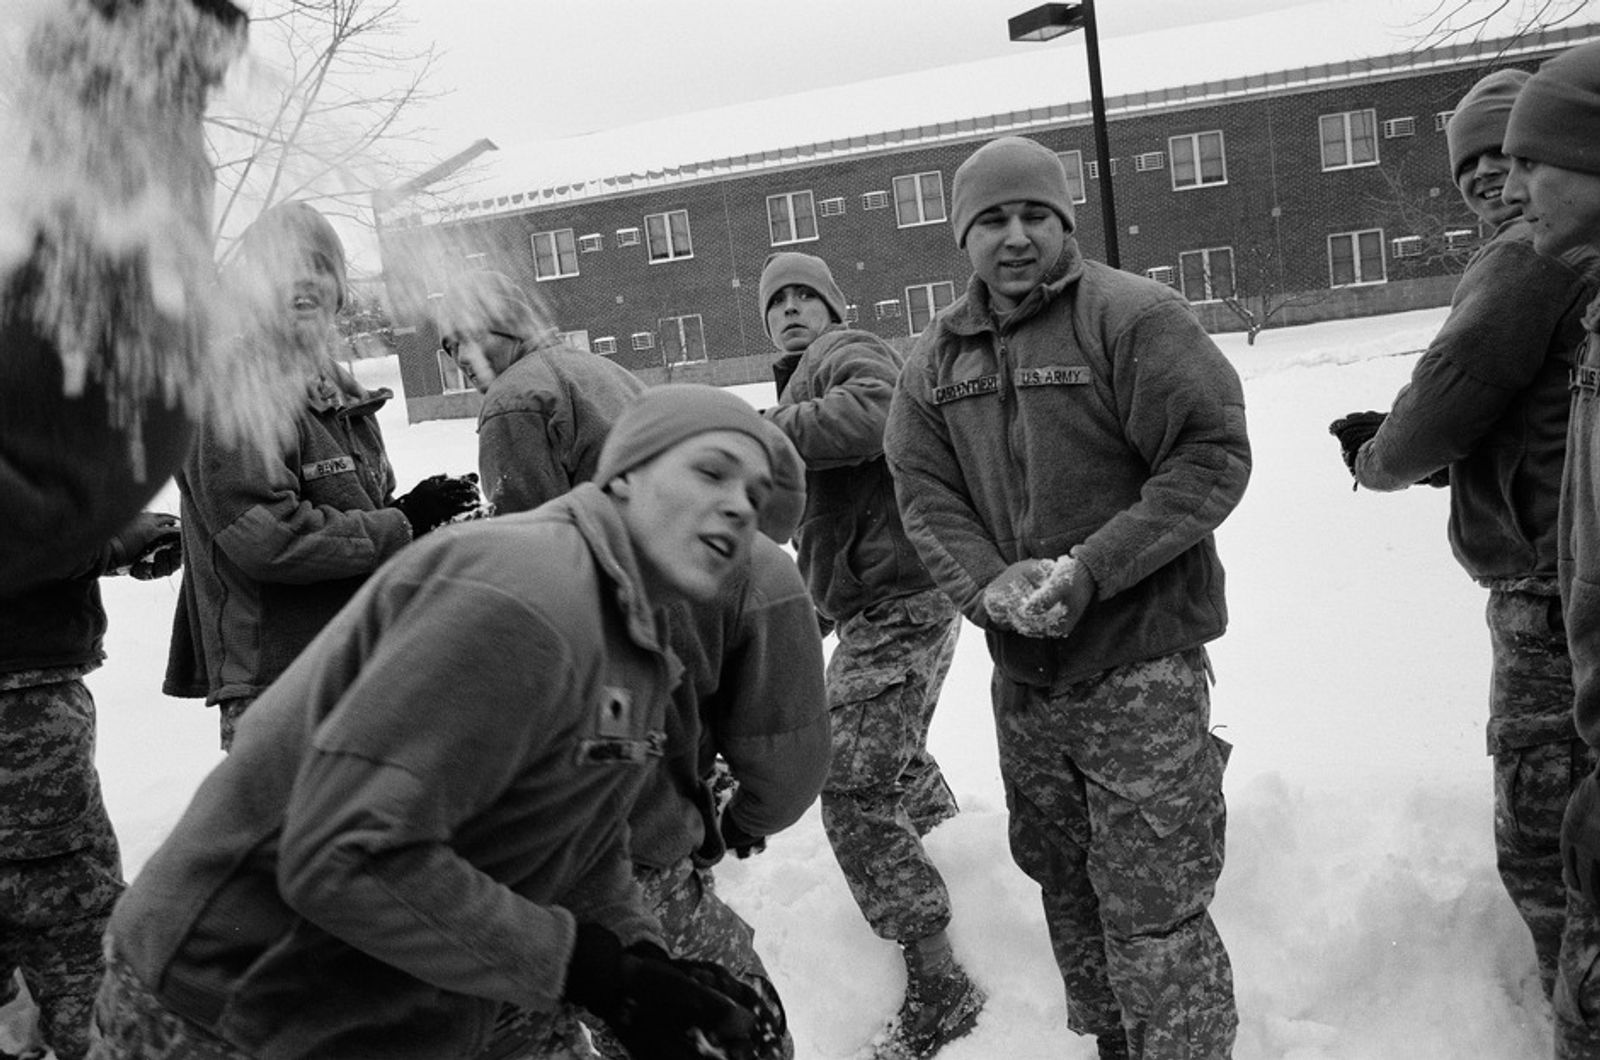 © Erin Trieb - Us infantry soldiers have snowball fight on, Fort Drum, New York. Jan 2010.